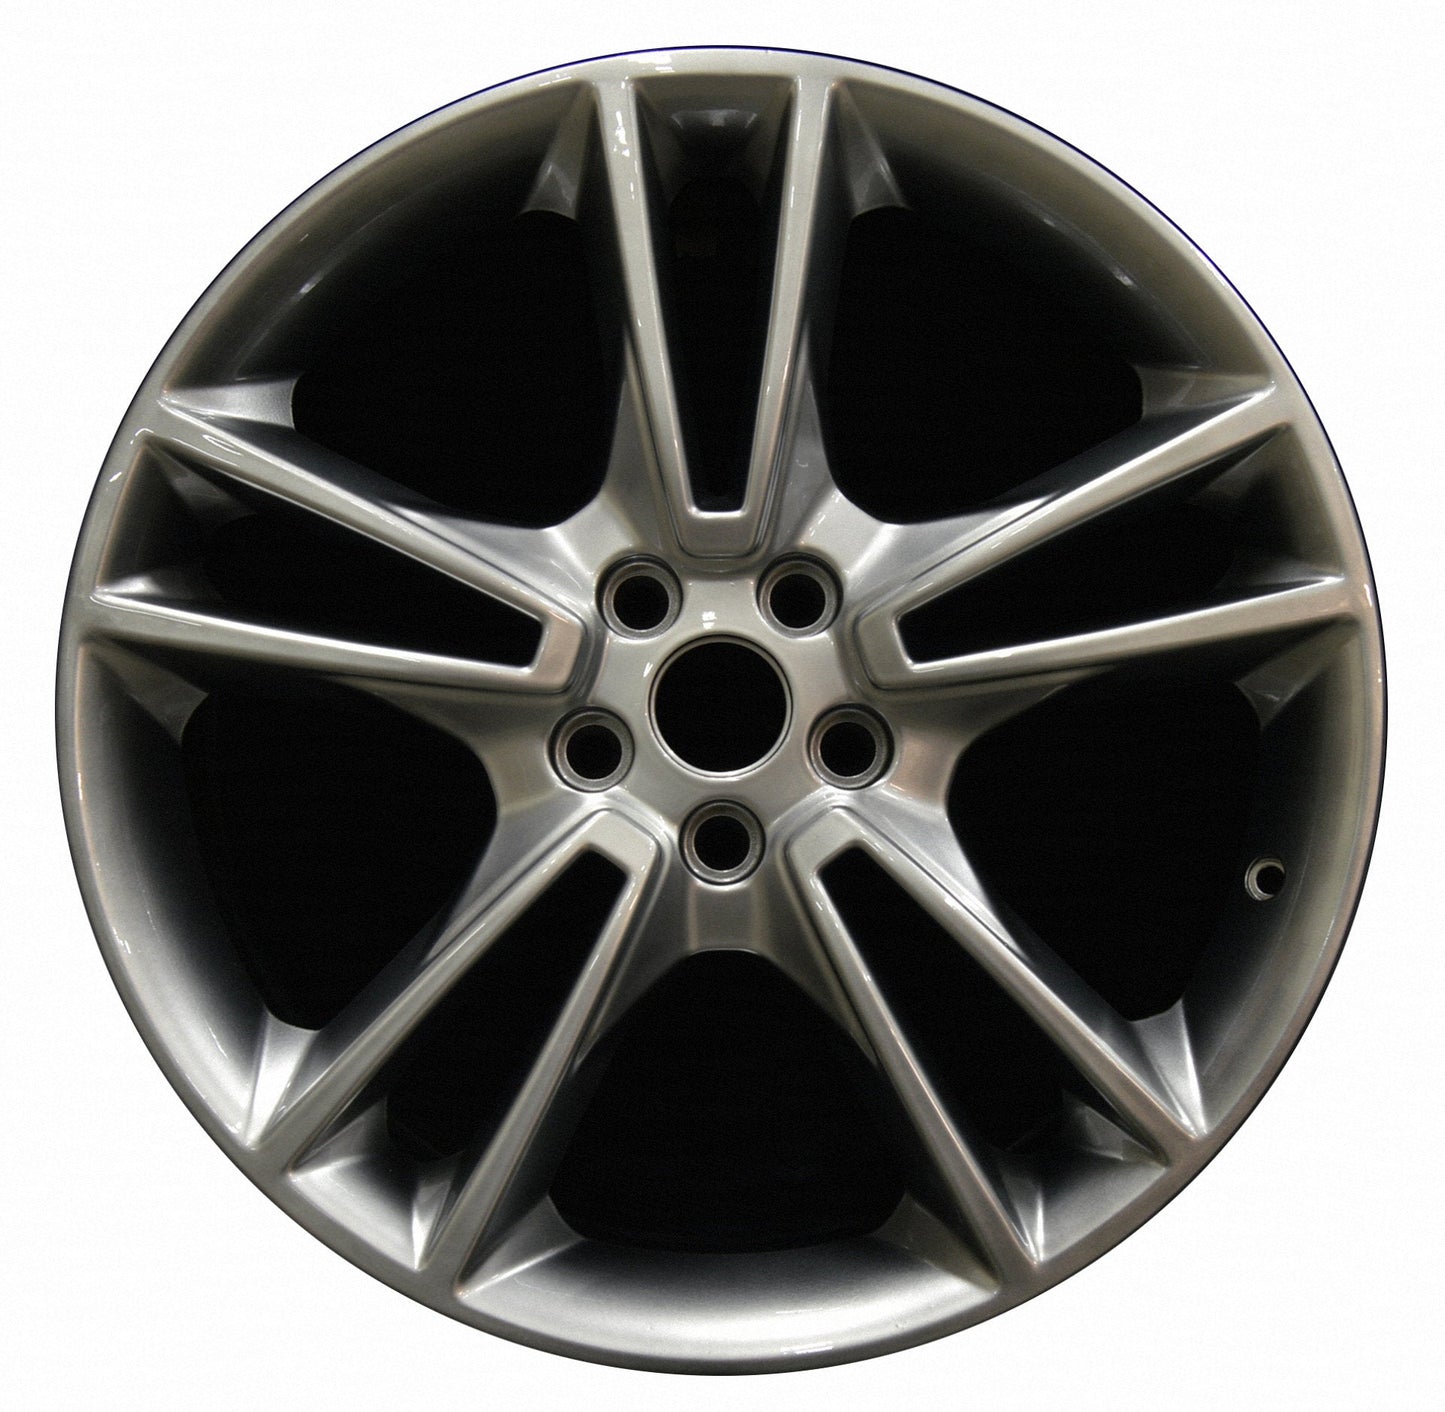 Ford Fusion  2011, 2012, 2013, 2014, 2015, 2016 Factory OEM Car Wheel Size 19x8 Alloy WAO.3962.LS100V3.FFBRT